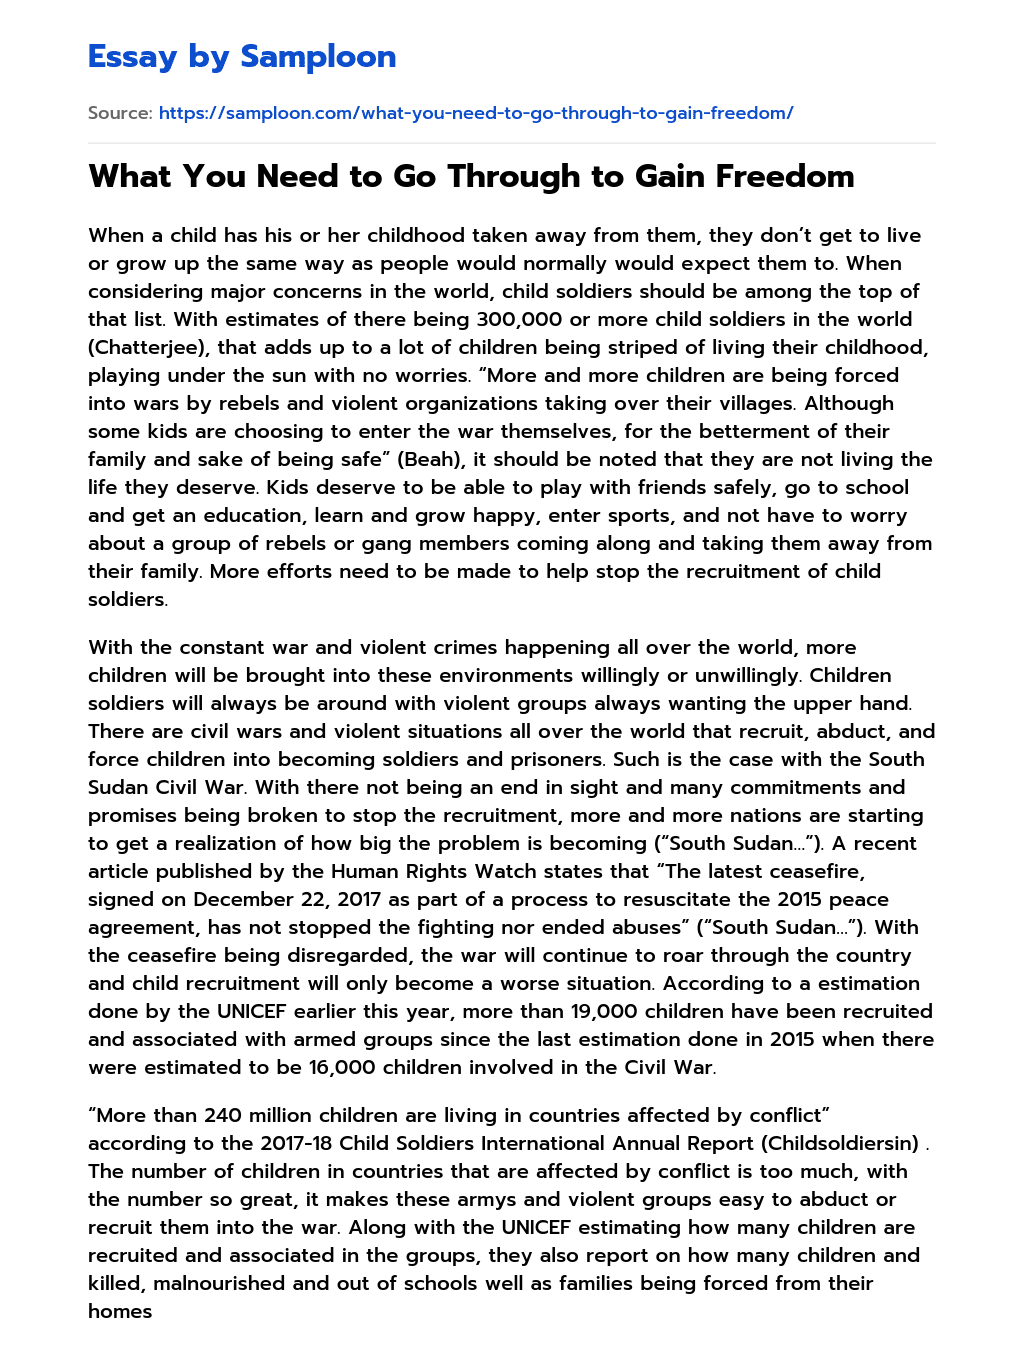 What You Need to Go Through to Gain Freedom essay